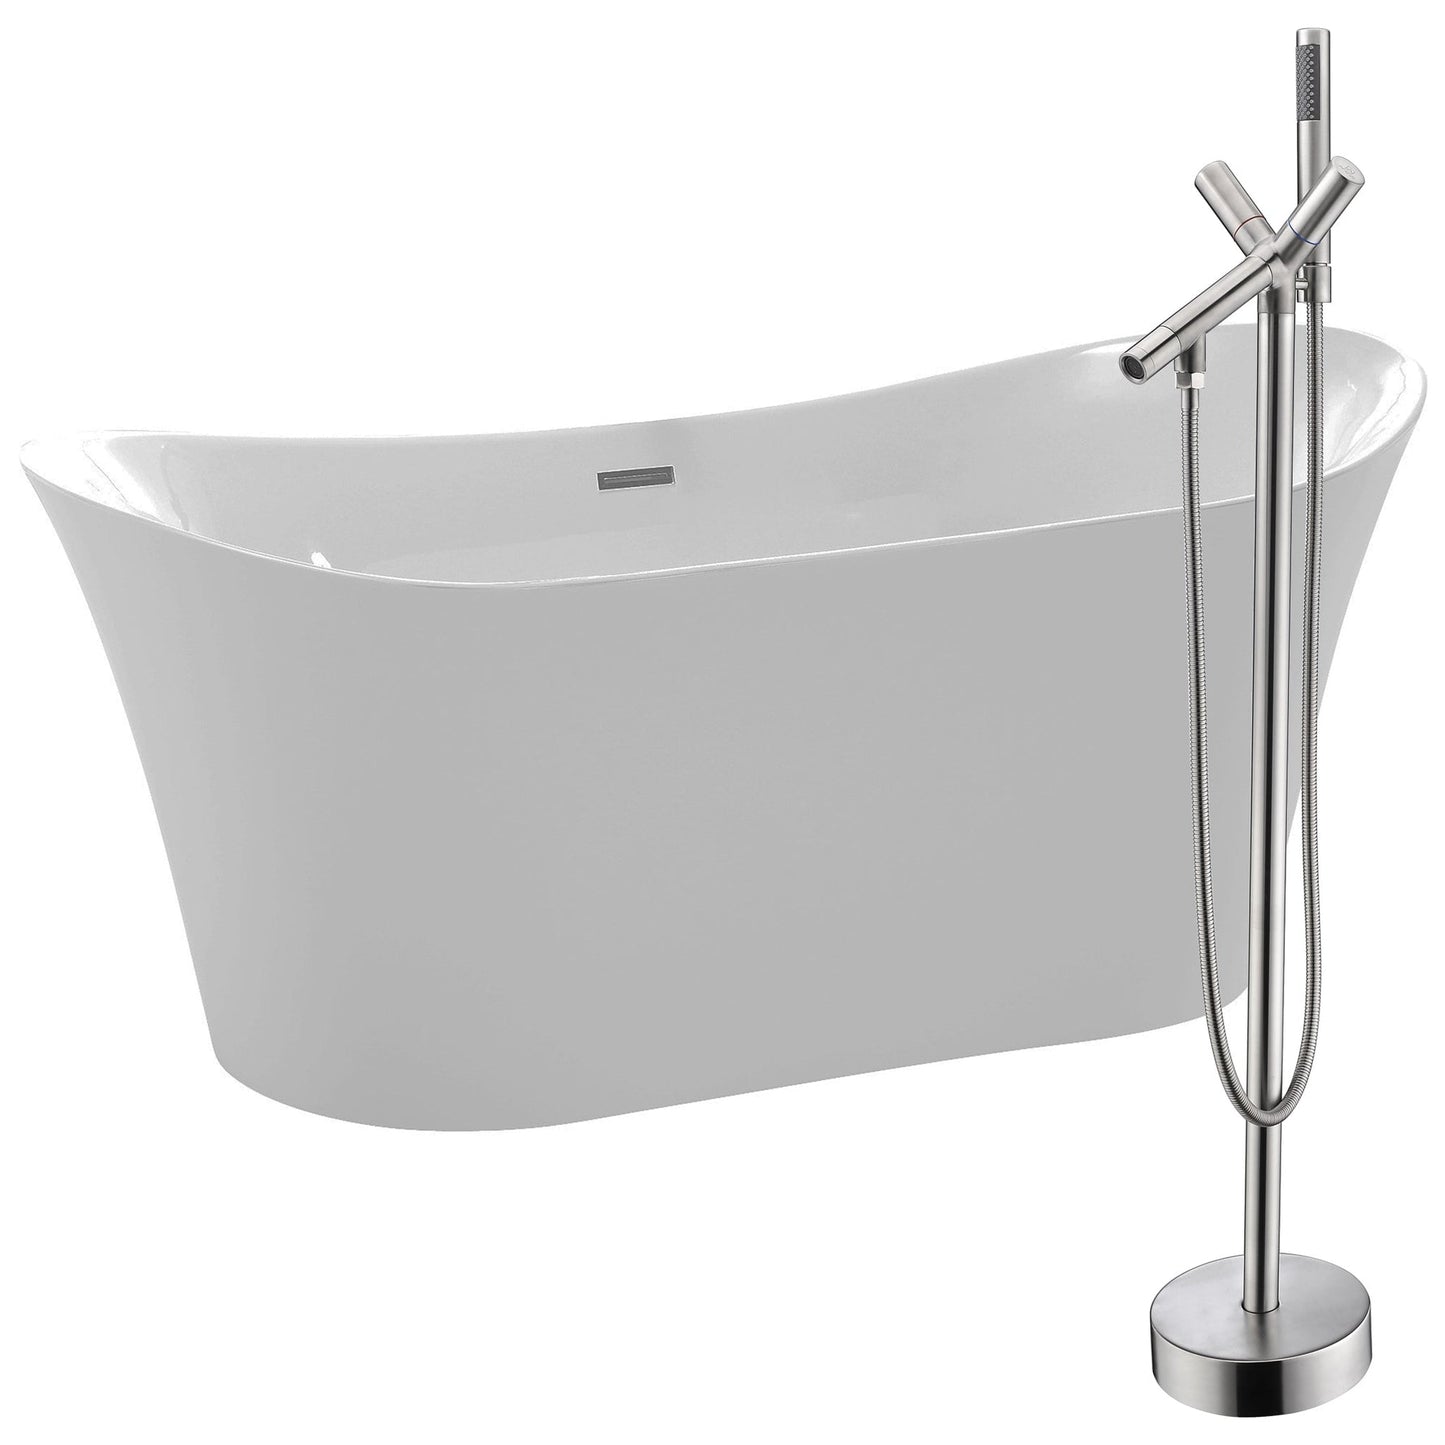 ANZZI Eft Series 67" x 31" Freestanding Glossy White Bathtub With Built-In Overflow, Pop Up Drain and Havasu Bathtub Faucet